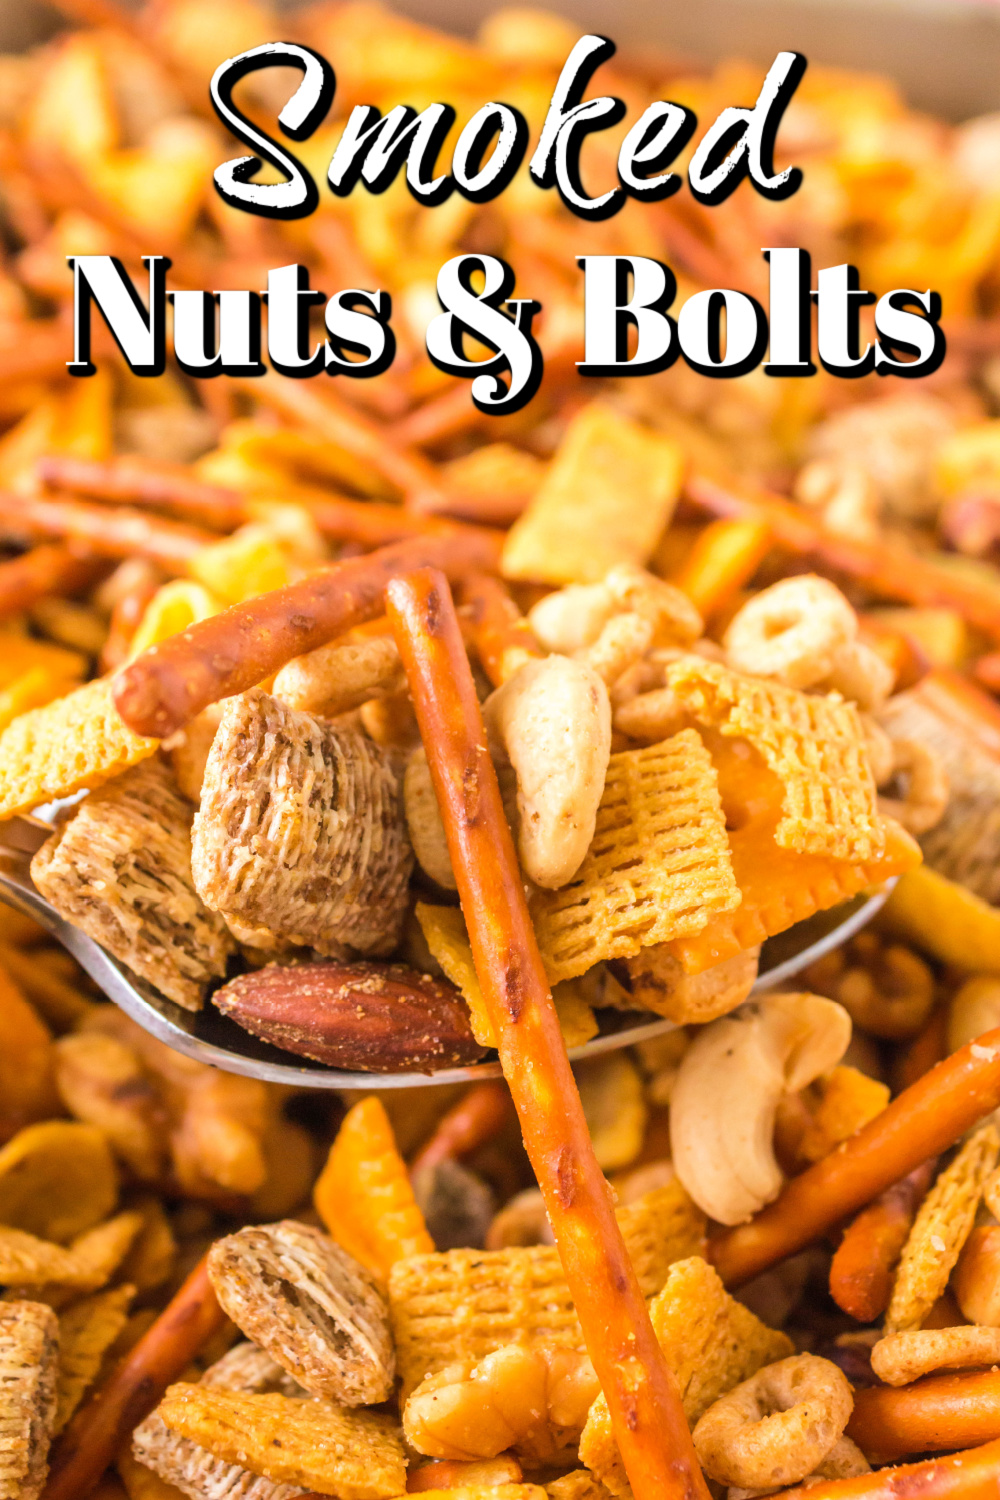 These smoked mixed nuts and bolts are the perfect snack for any gathering from holidays to game days. Everyone is going to love them!